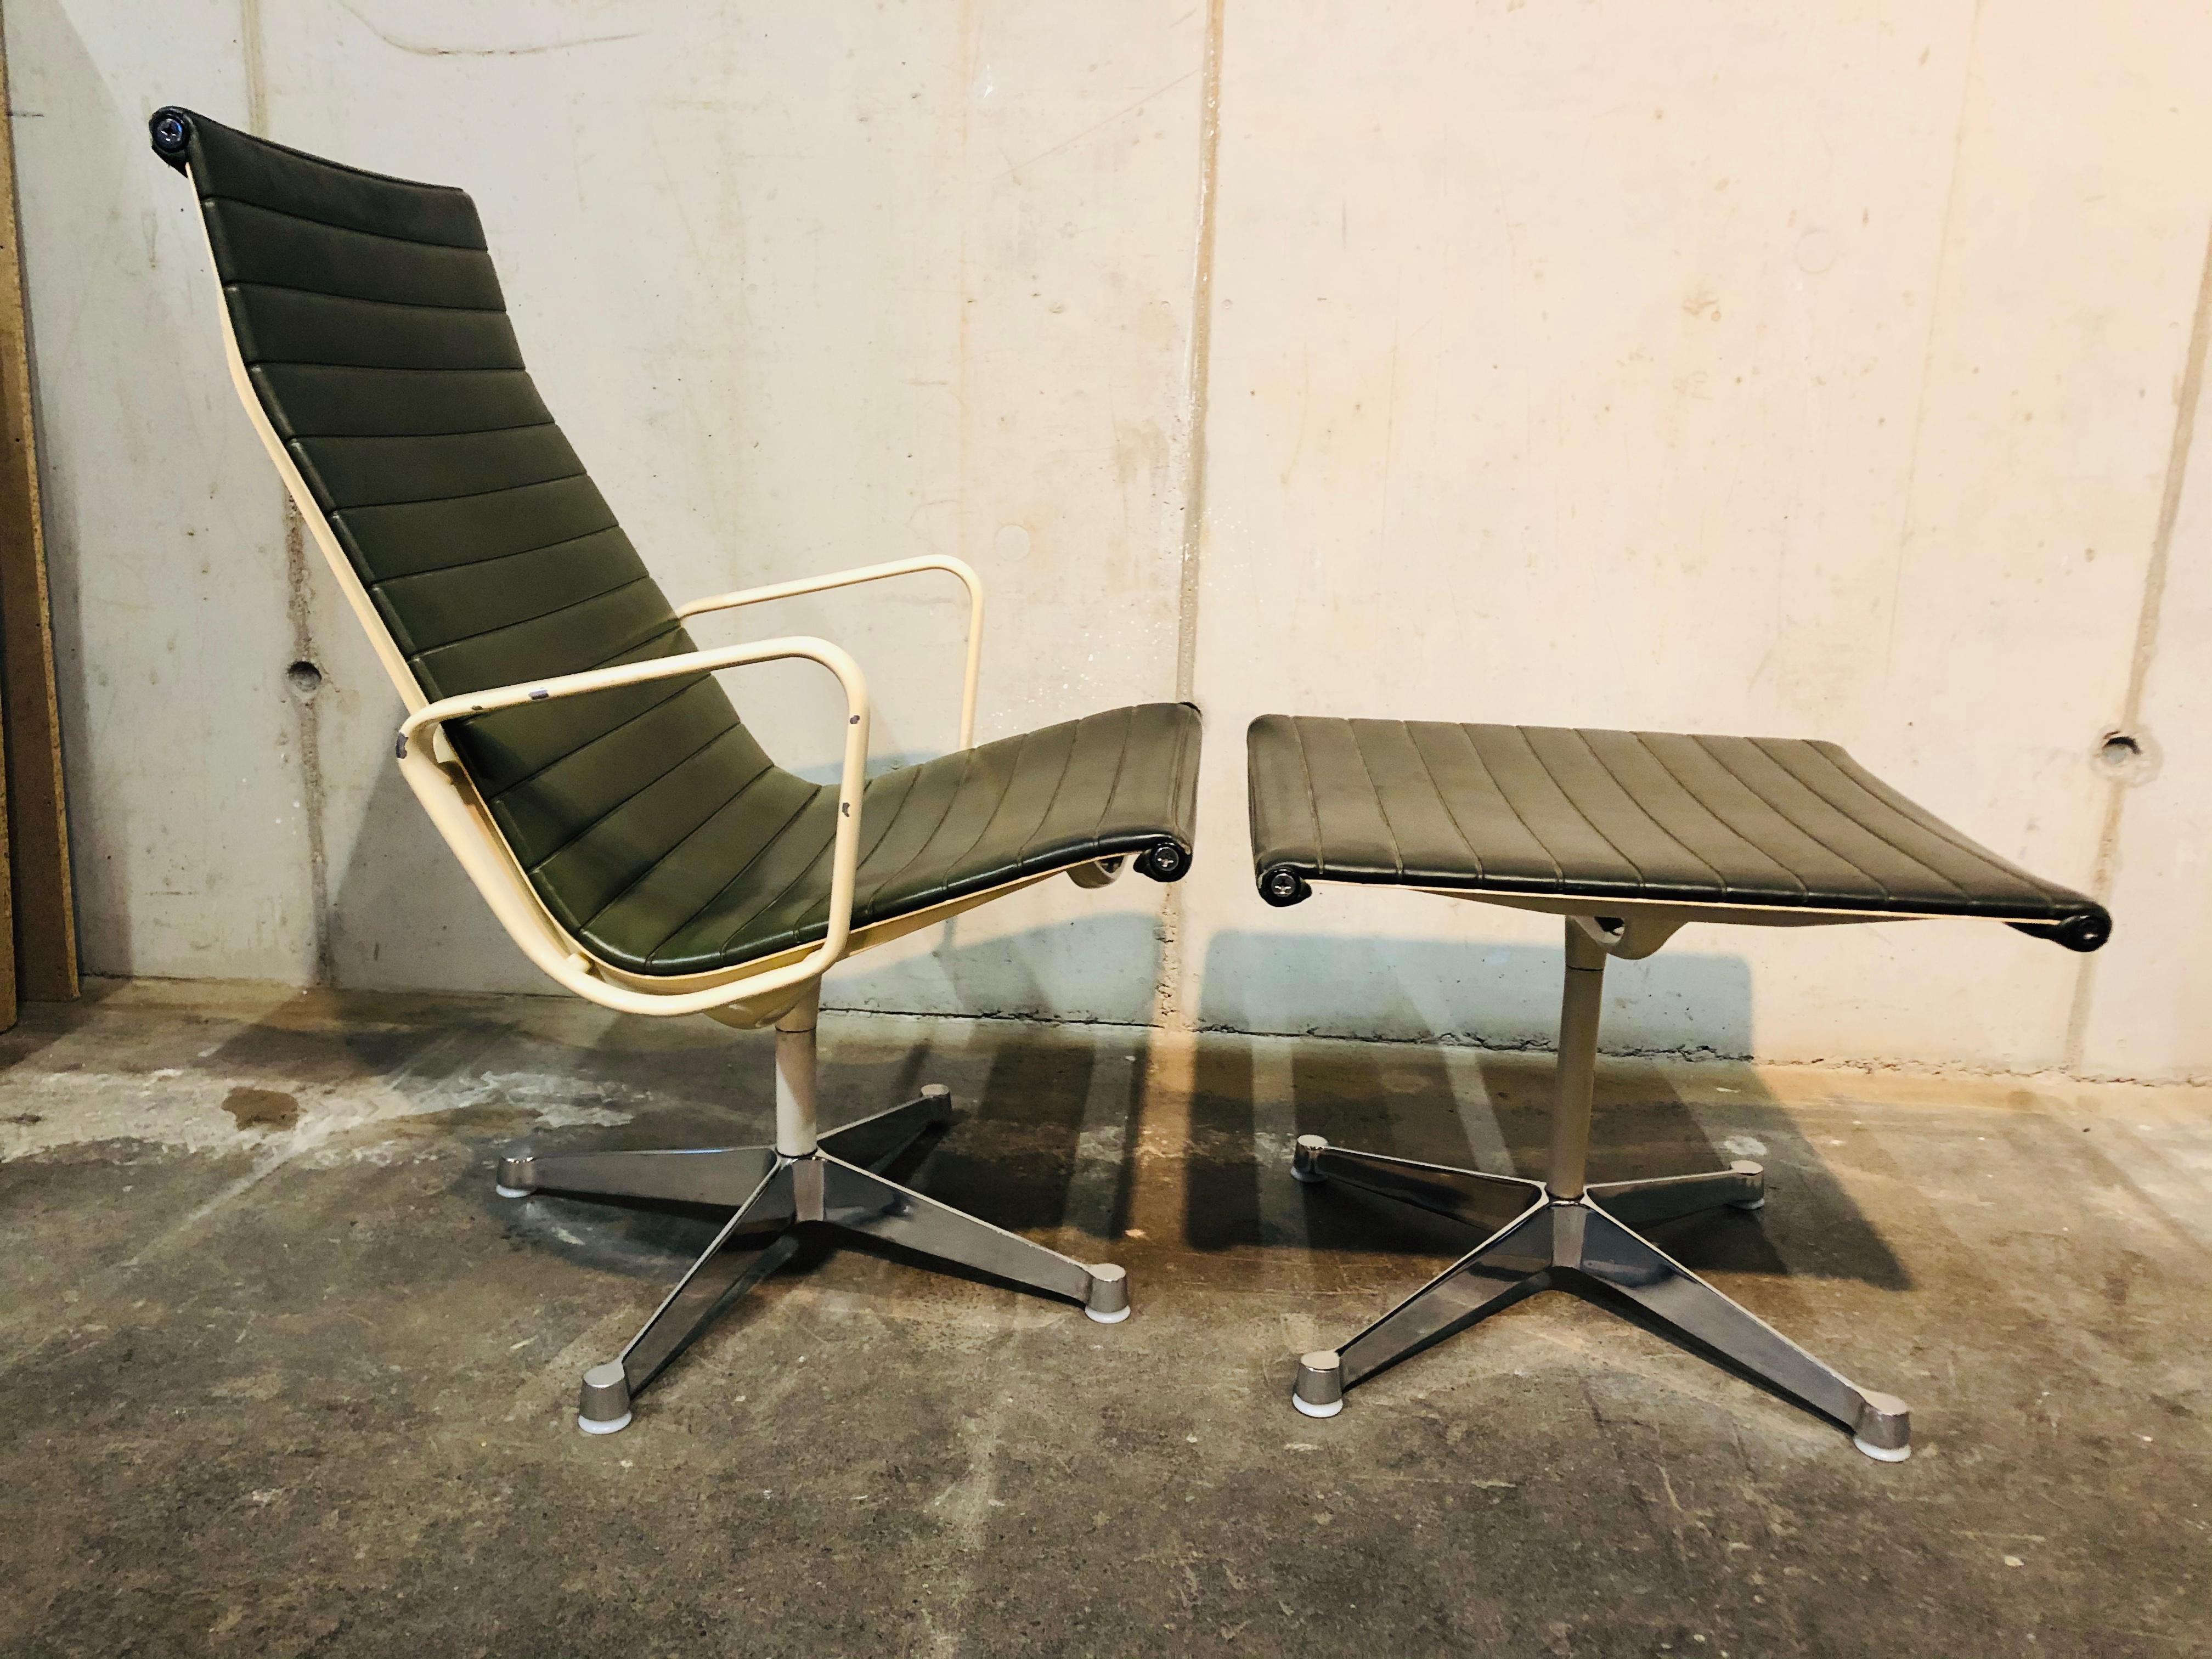 The Alumnium chair by Eames is one of the major designs of the 20th century. Originally Charles und Ray Eames designed it in 1958 for a private home of an art collector in Columbus (Indiana, USA). For this design the married couple didn't make use